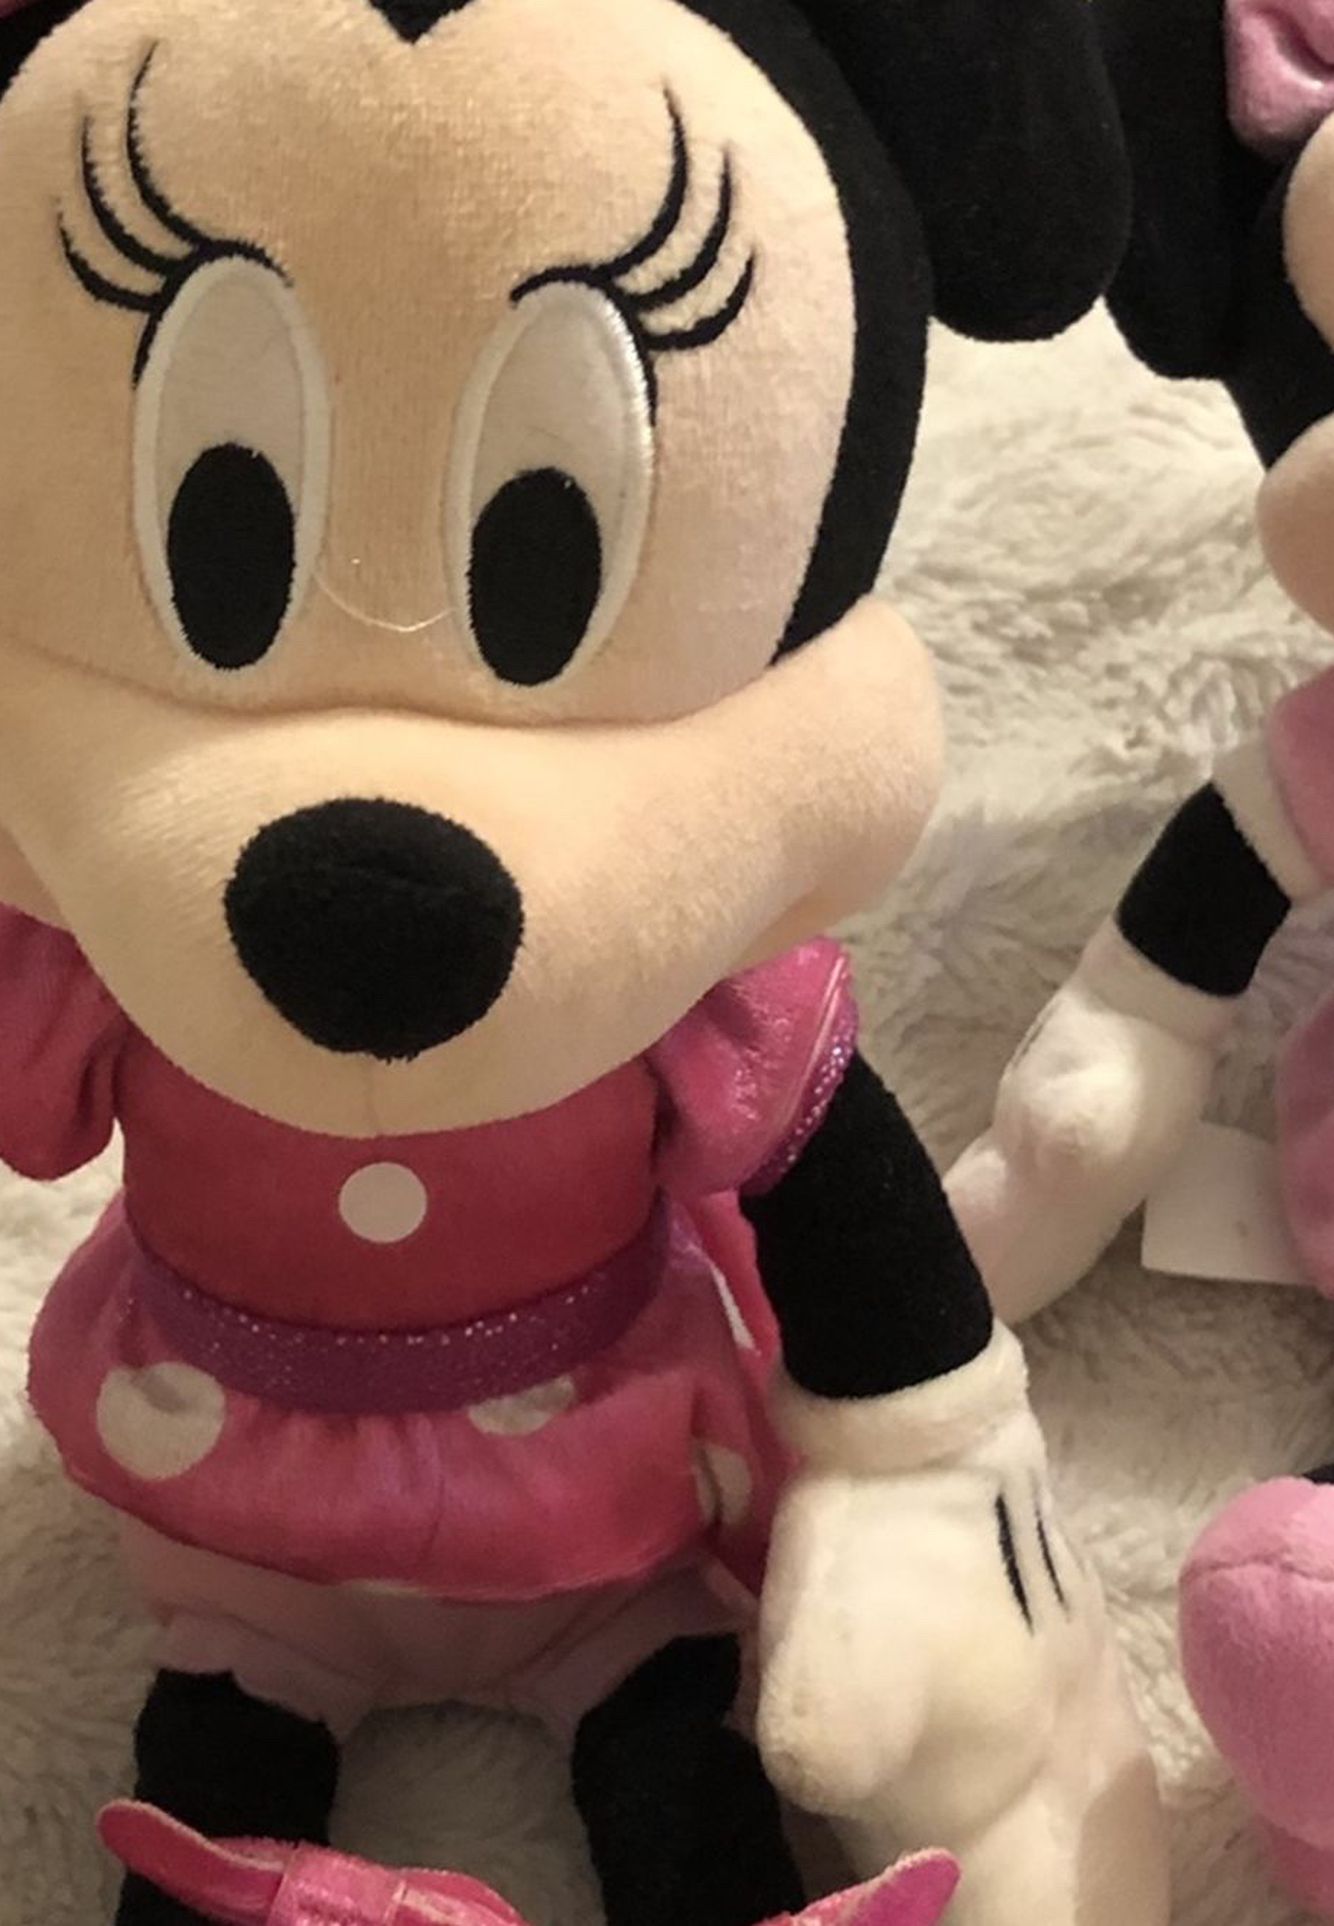 A Little Girl’s Minnie Mouse Bicycle Helmet And 2 Matching Mini Mouse Disney Stuffed Toys